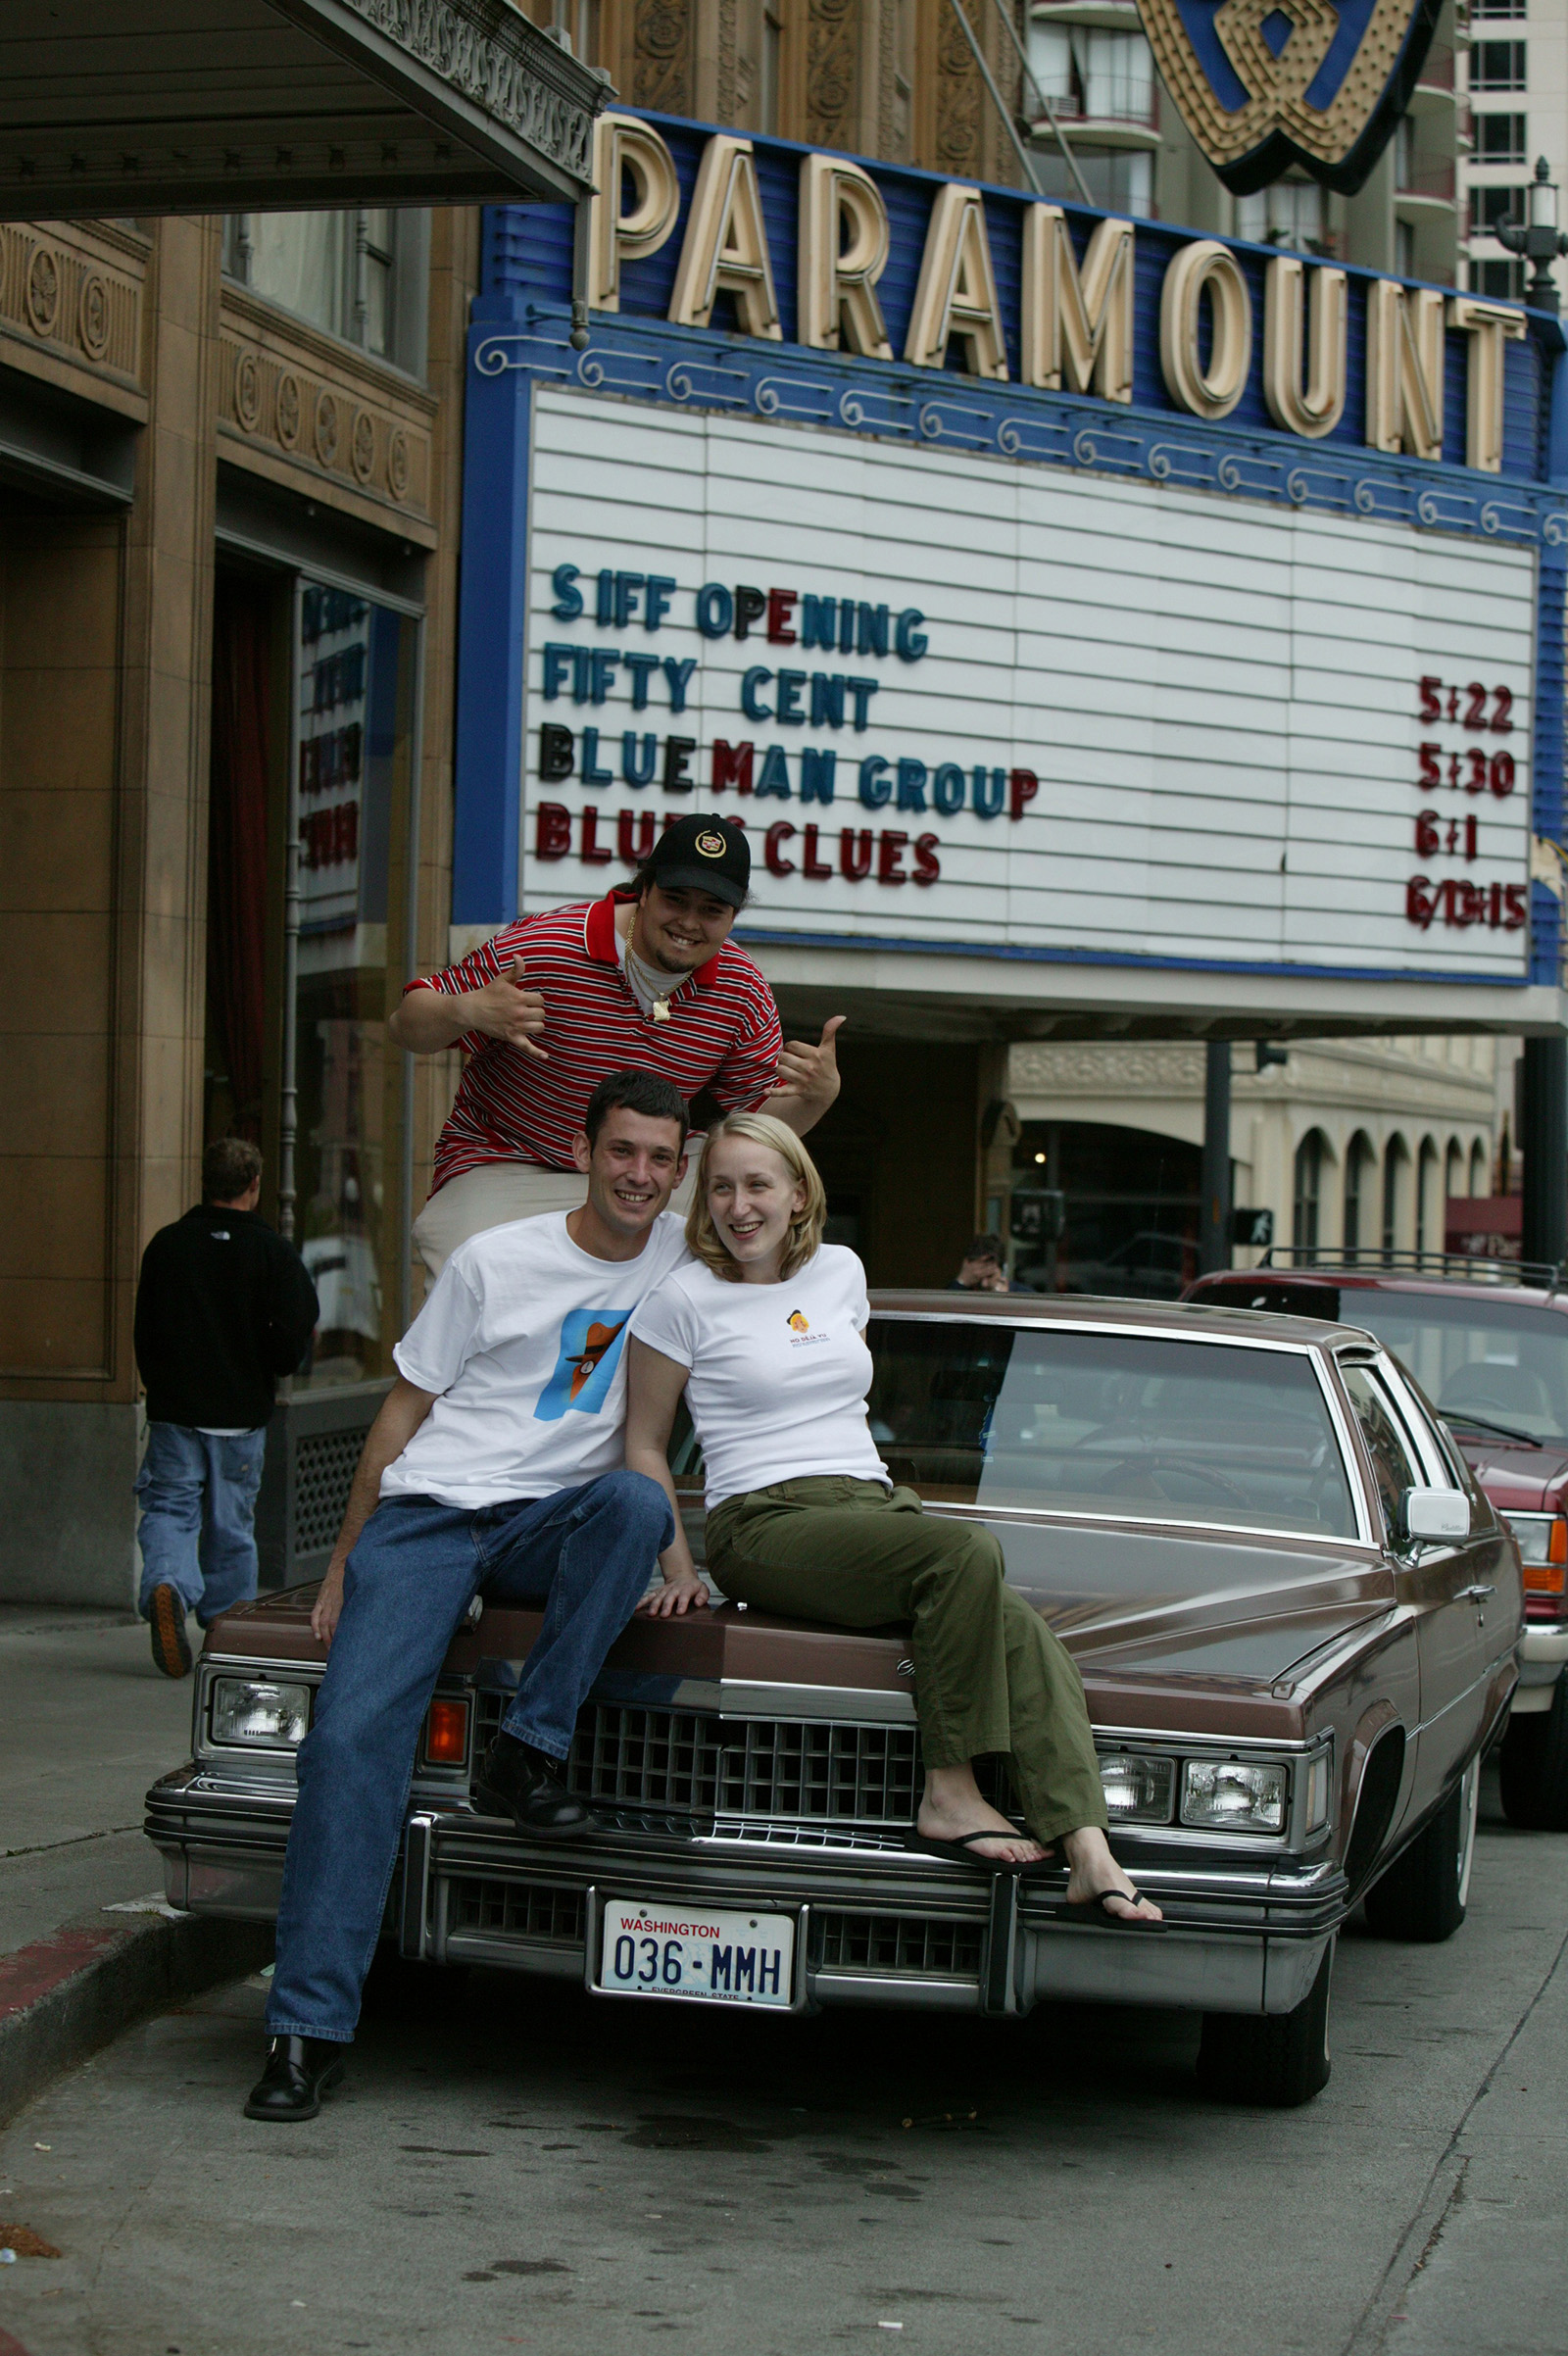 2003 festival merch being modeled from the hood of a car in front of the Paramount Theatre marquee, sure! Why not?